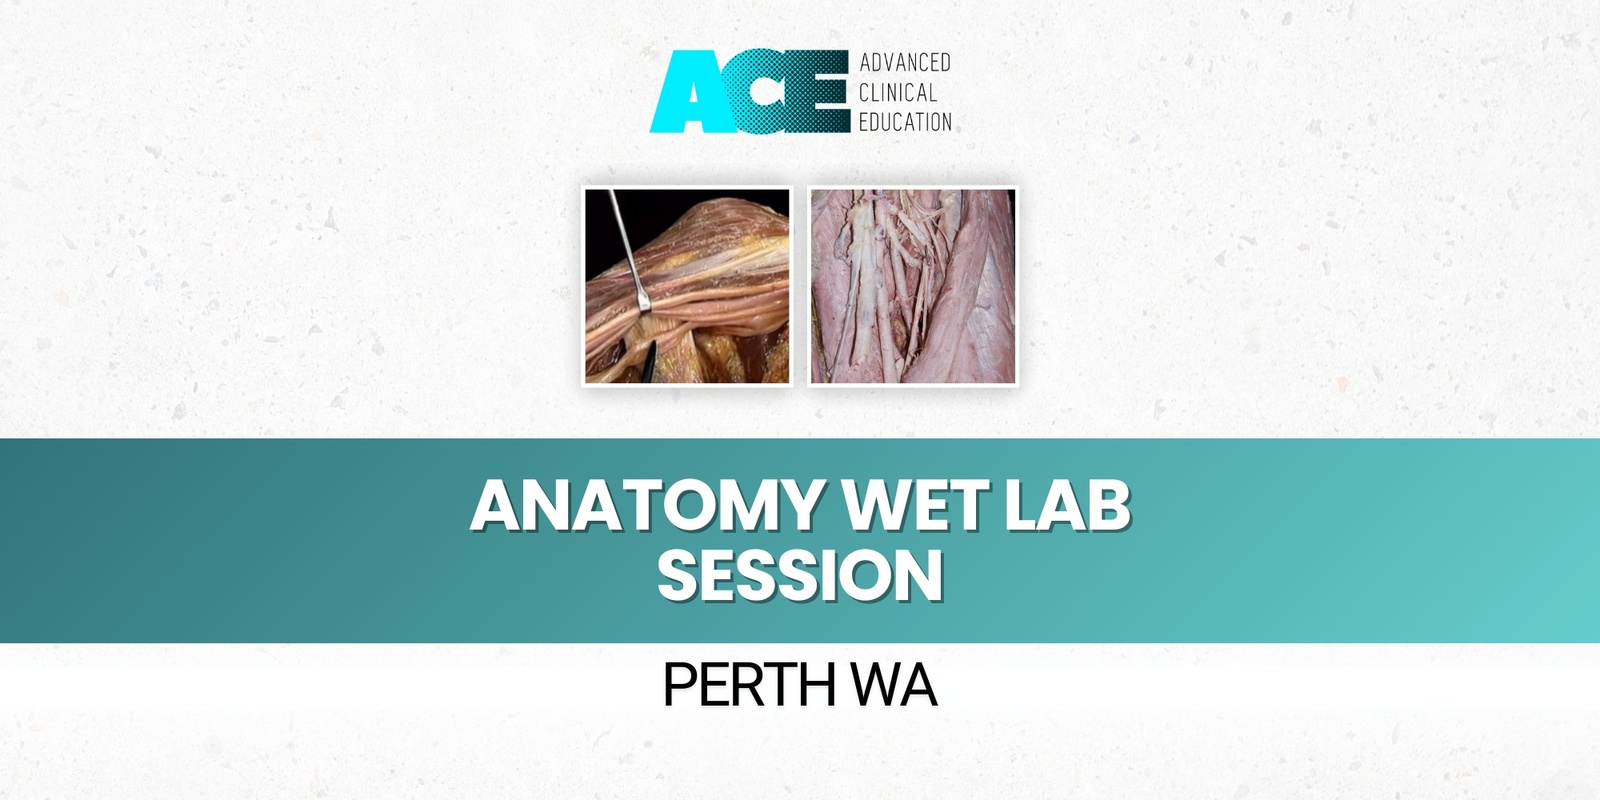 Banner image for Anatomy Wet Lab Session - Whole body (Perth WA)